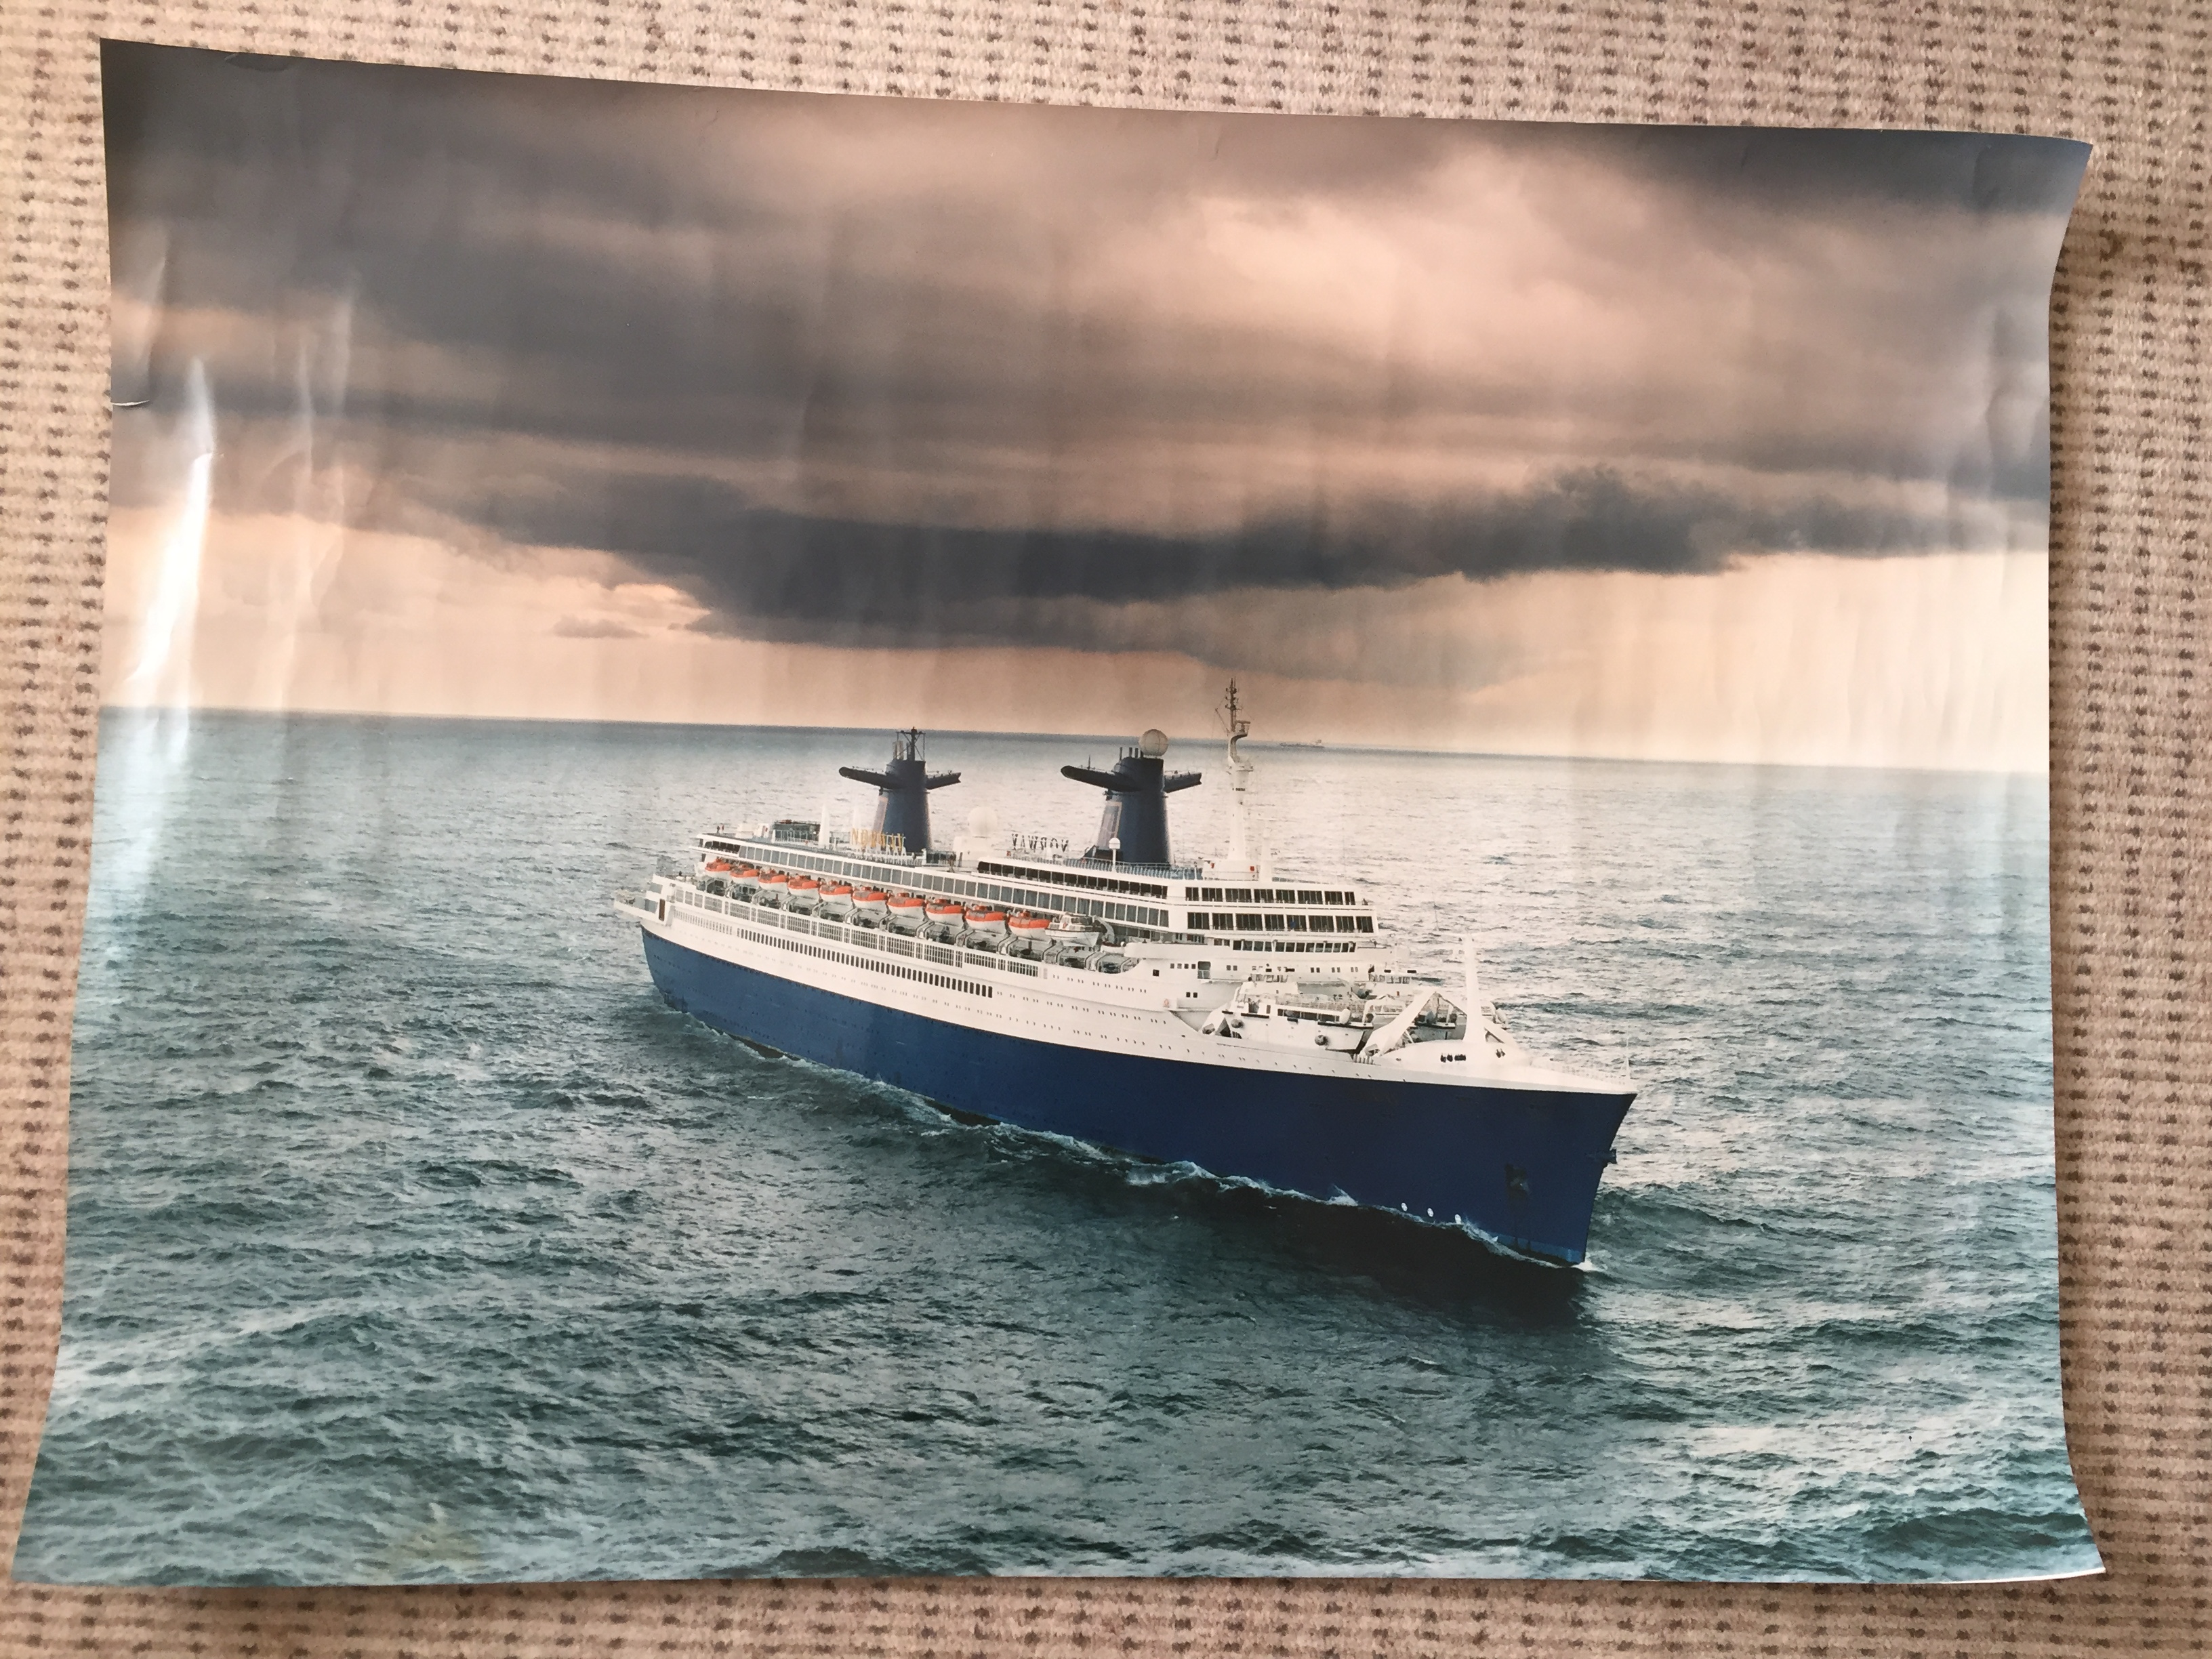 VERY LARGE SIZE COLOUR PHOTOGRAPH OF THE CRUISE SHIP THE NORWAY